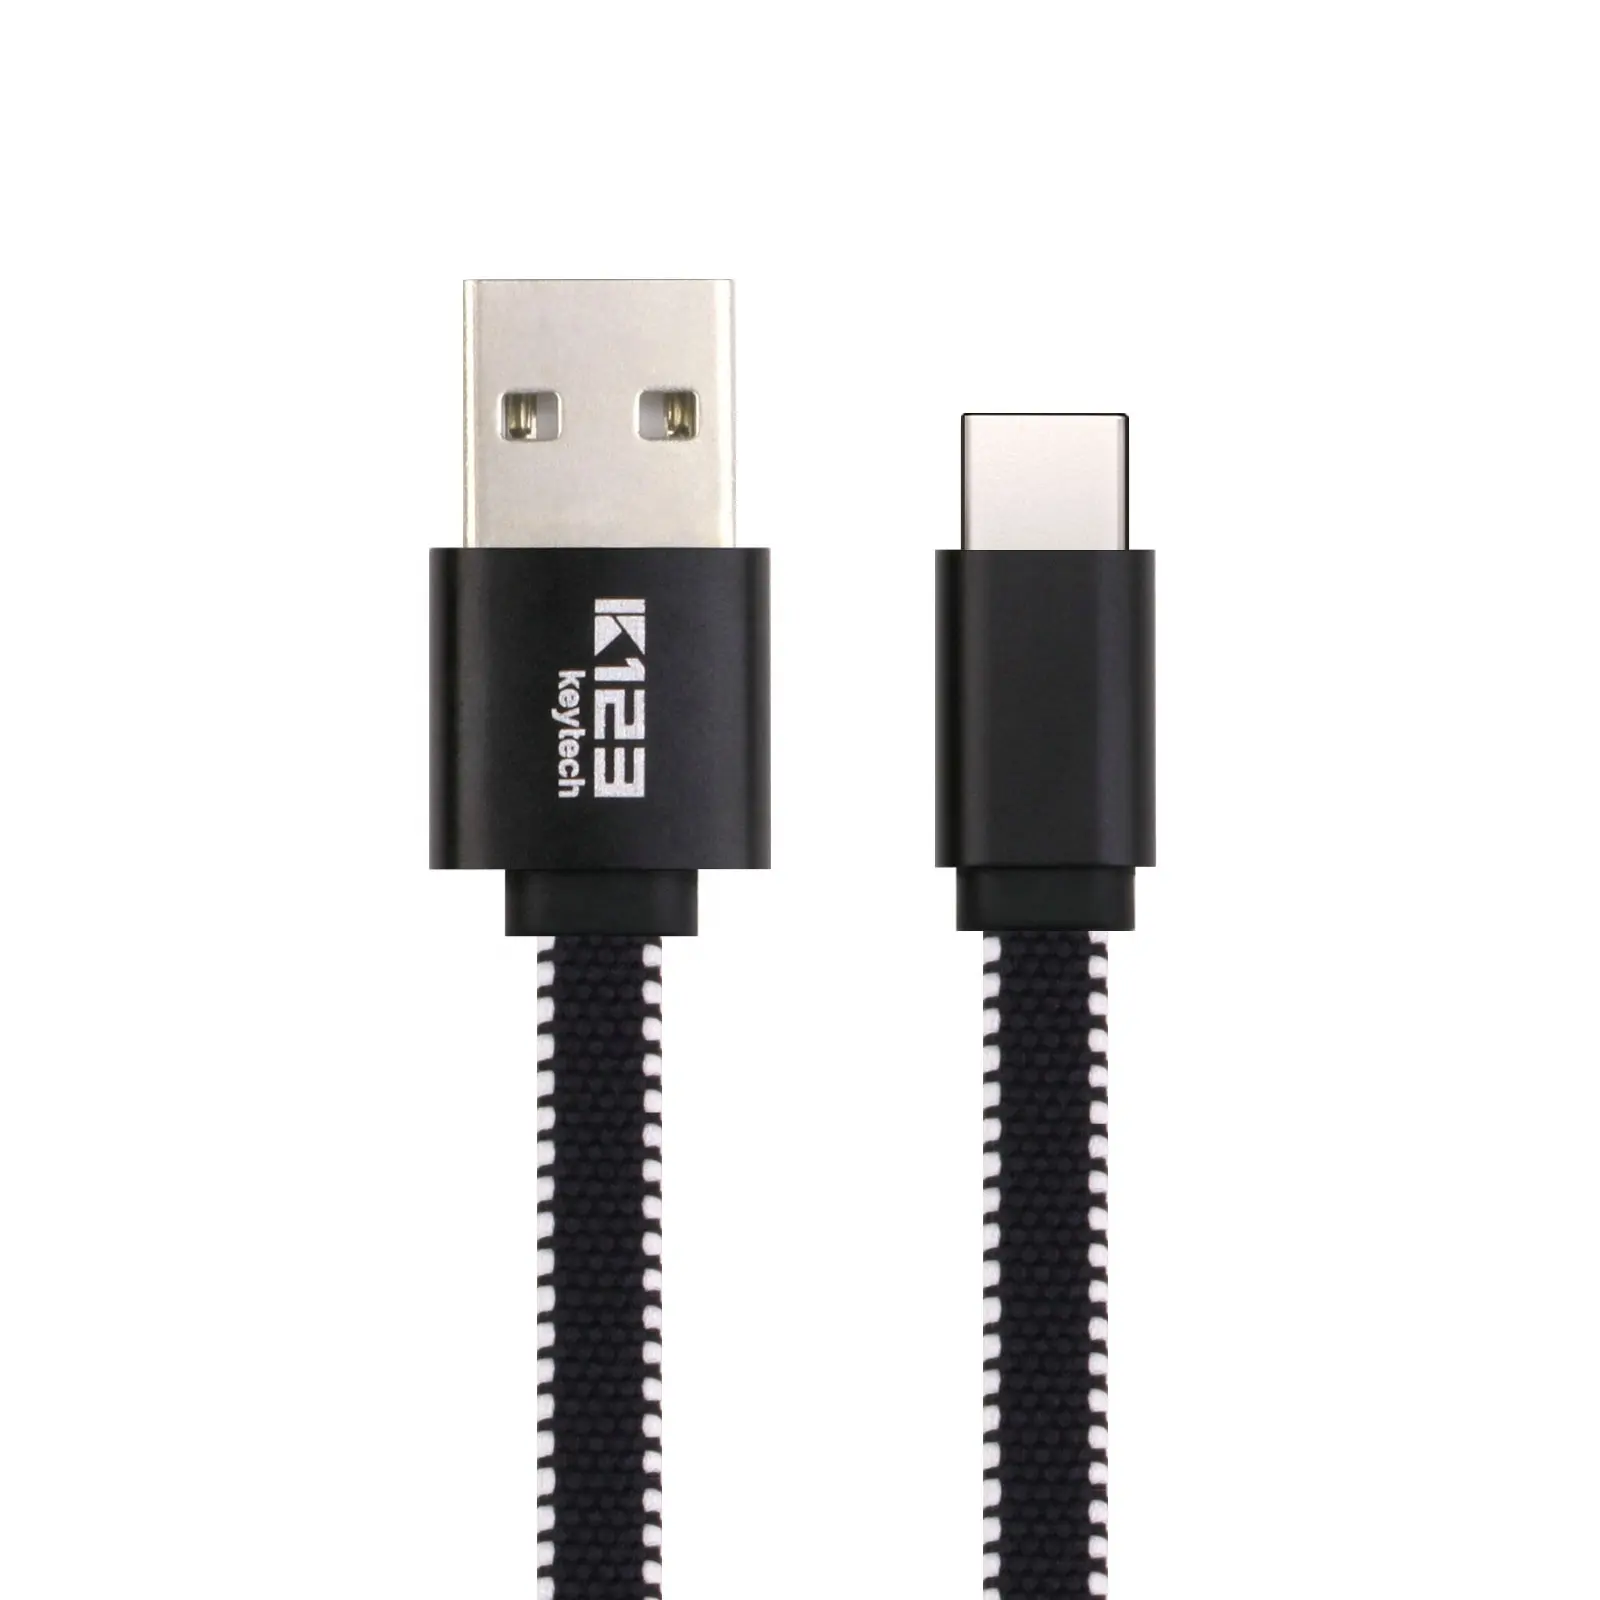 Flat USB cable 2.0 multi usb charger data cable micro usb charging cable for mobile phone